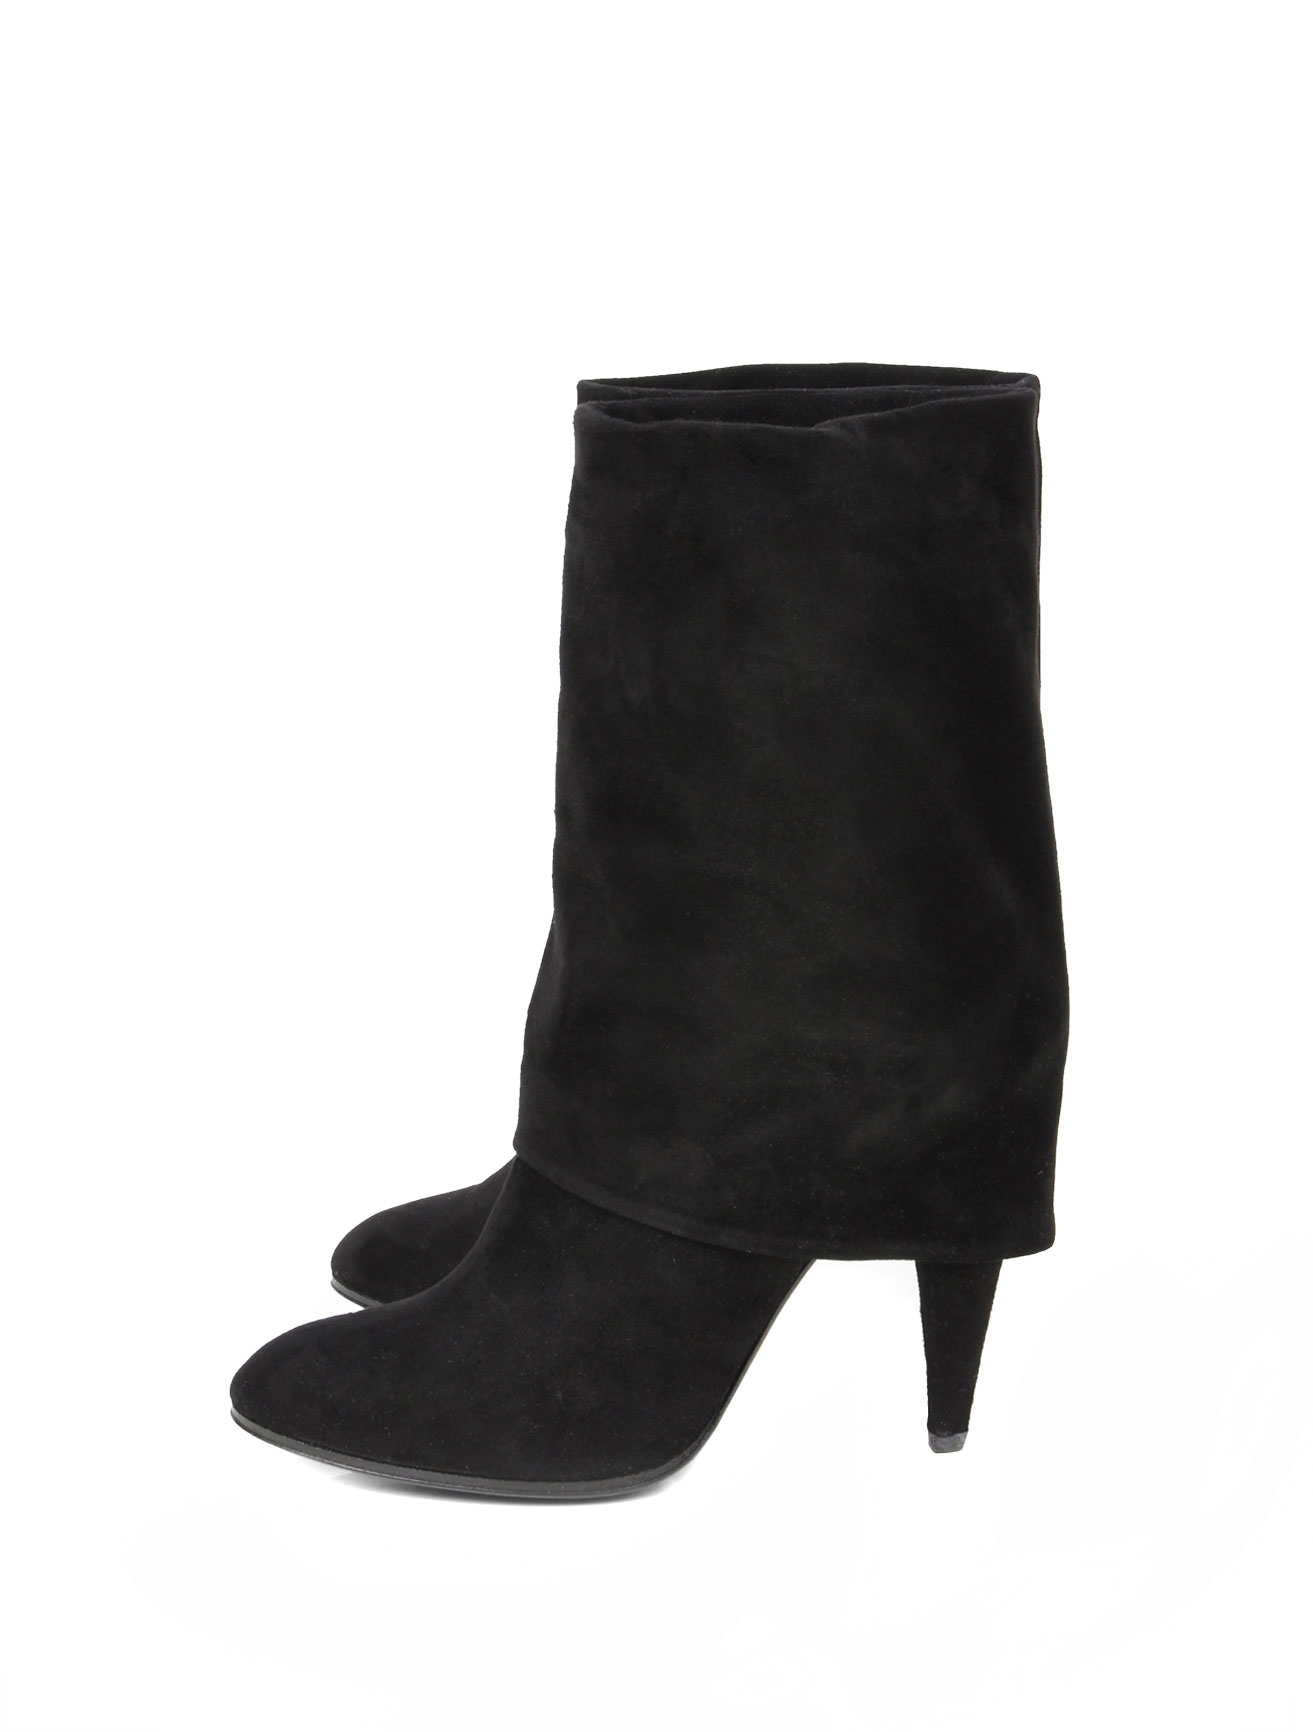 Sigerson Morrison Suede Fold Over Boots in Black | Lyst